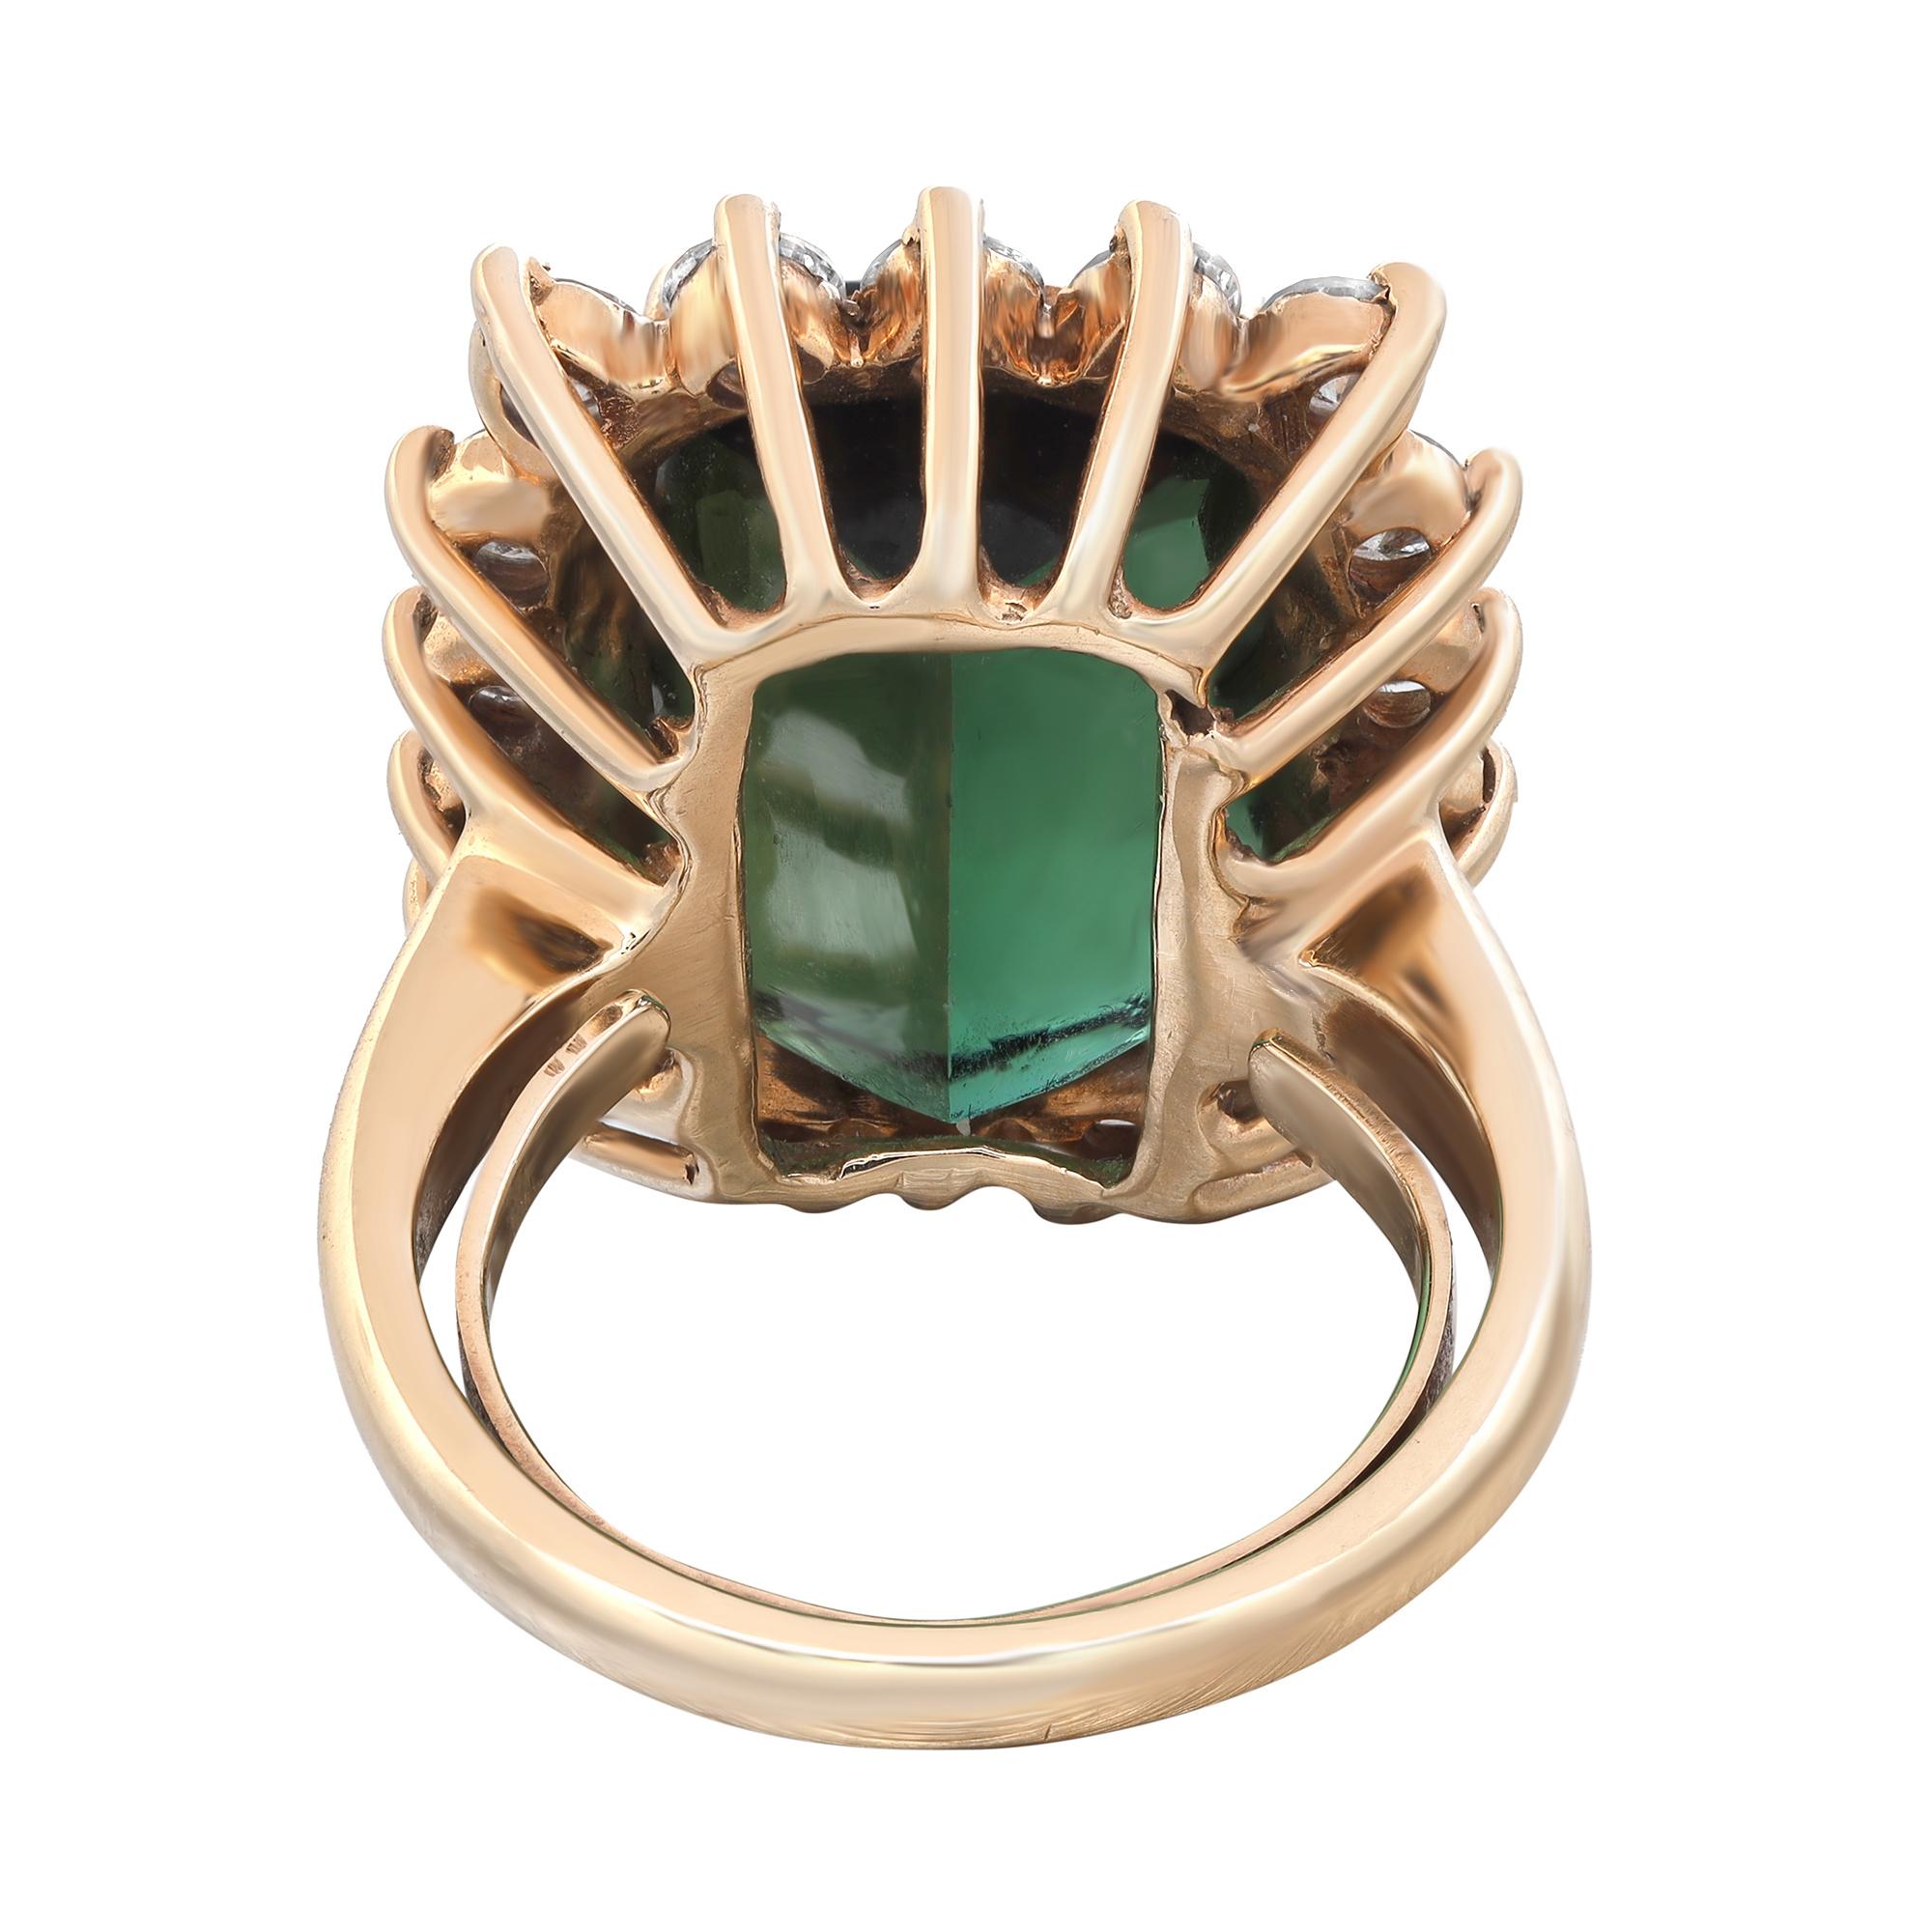 This amazingly beautiful ring features a lively and large rectangular antique cushion cut green Tourmaline weighing 8.53 carats that sits atop a halo of 18 round brilliant cut diamonds weighing 1.80 carats approx. Diamond quality: color G and